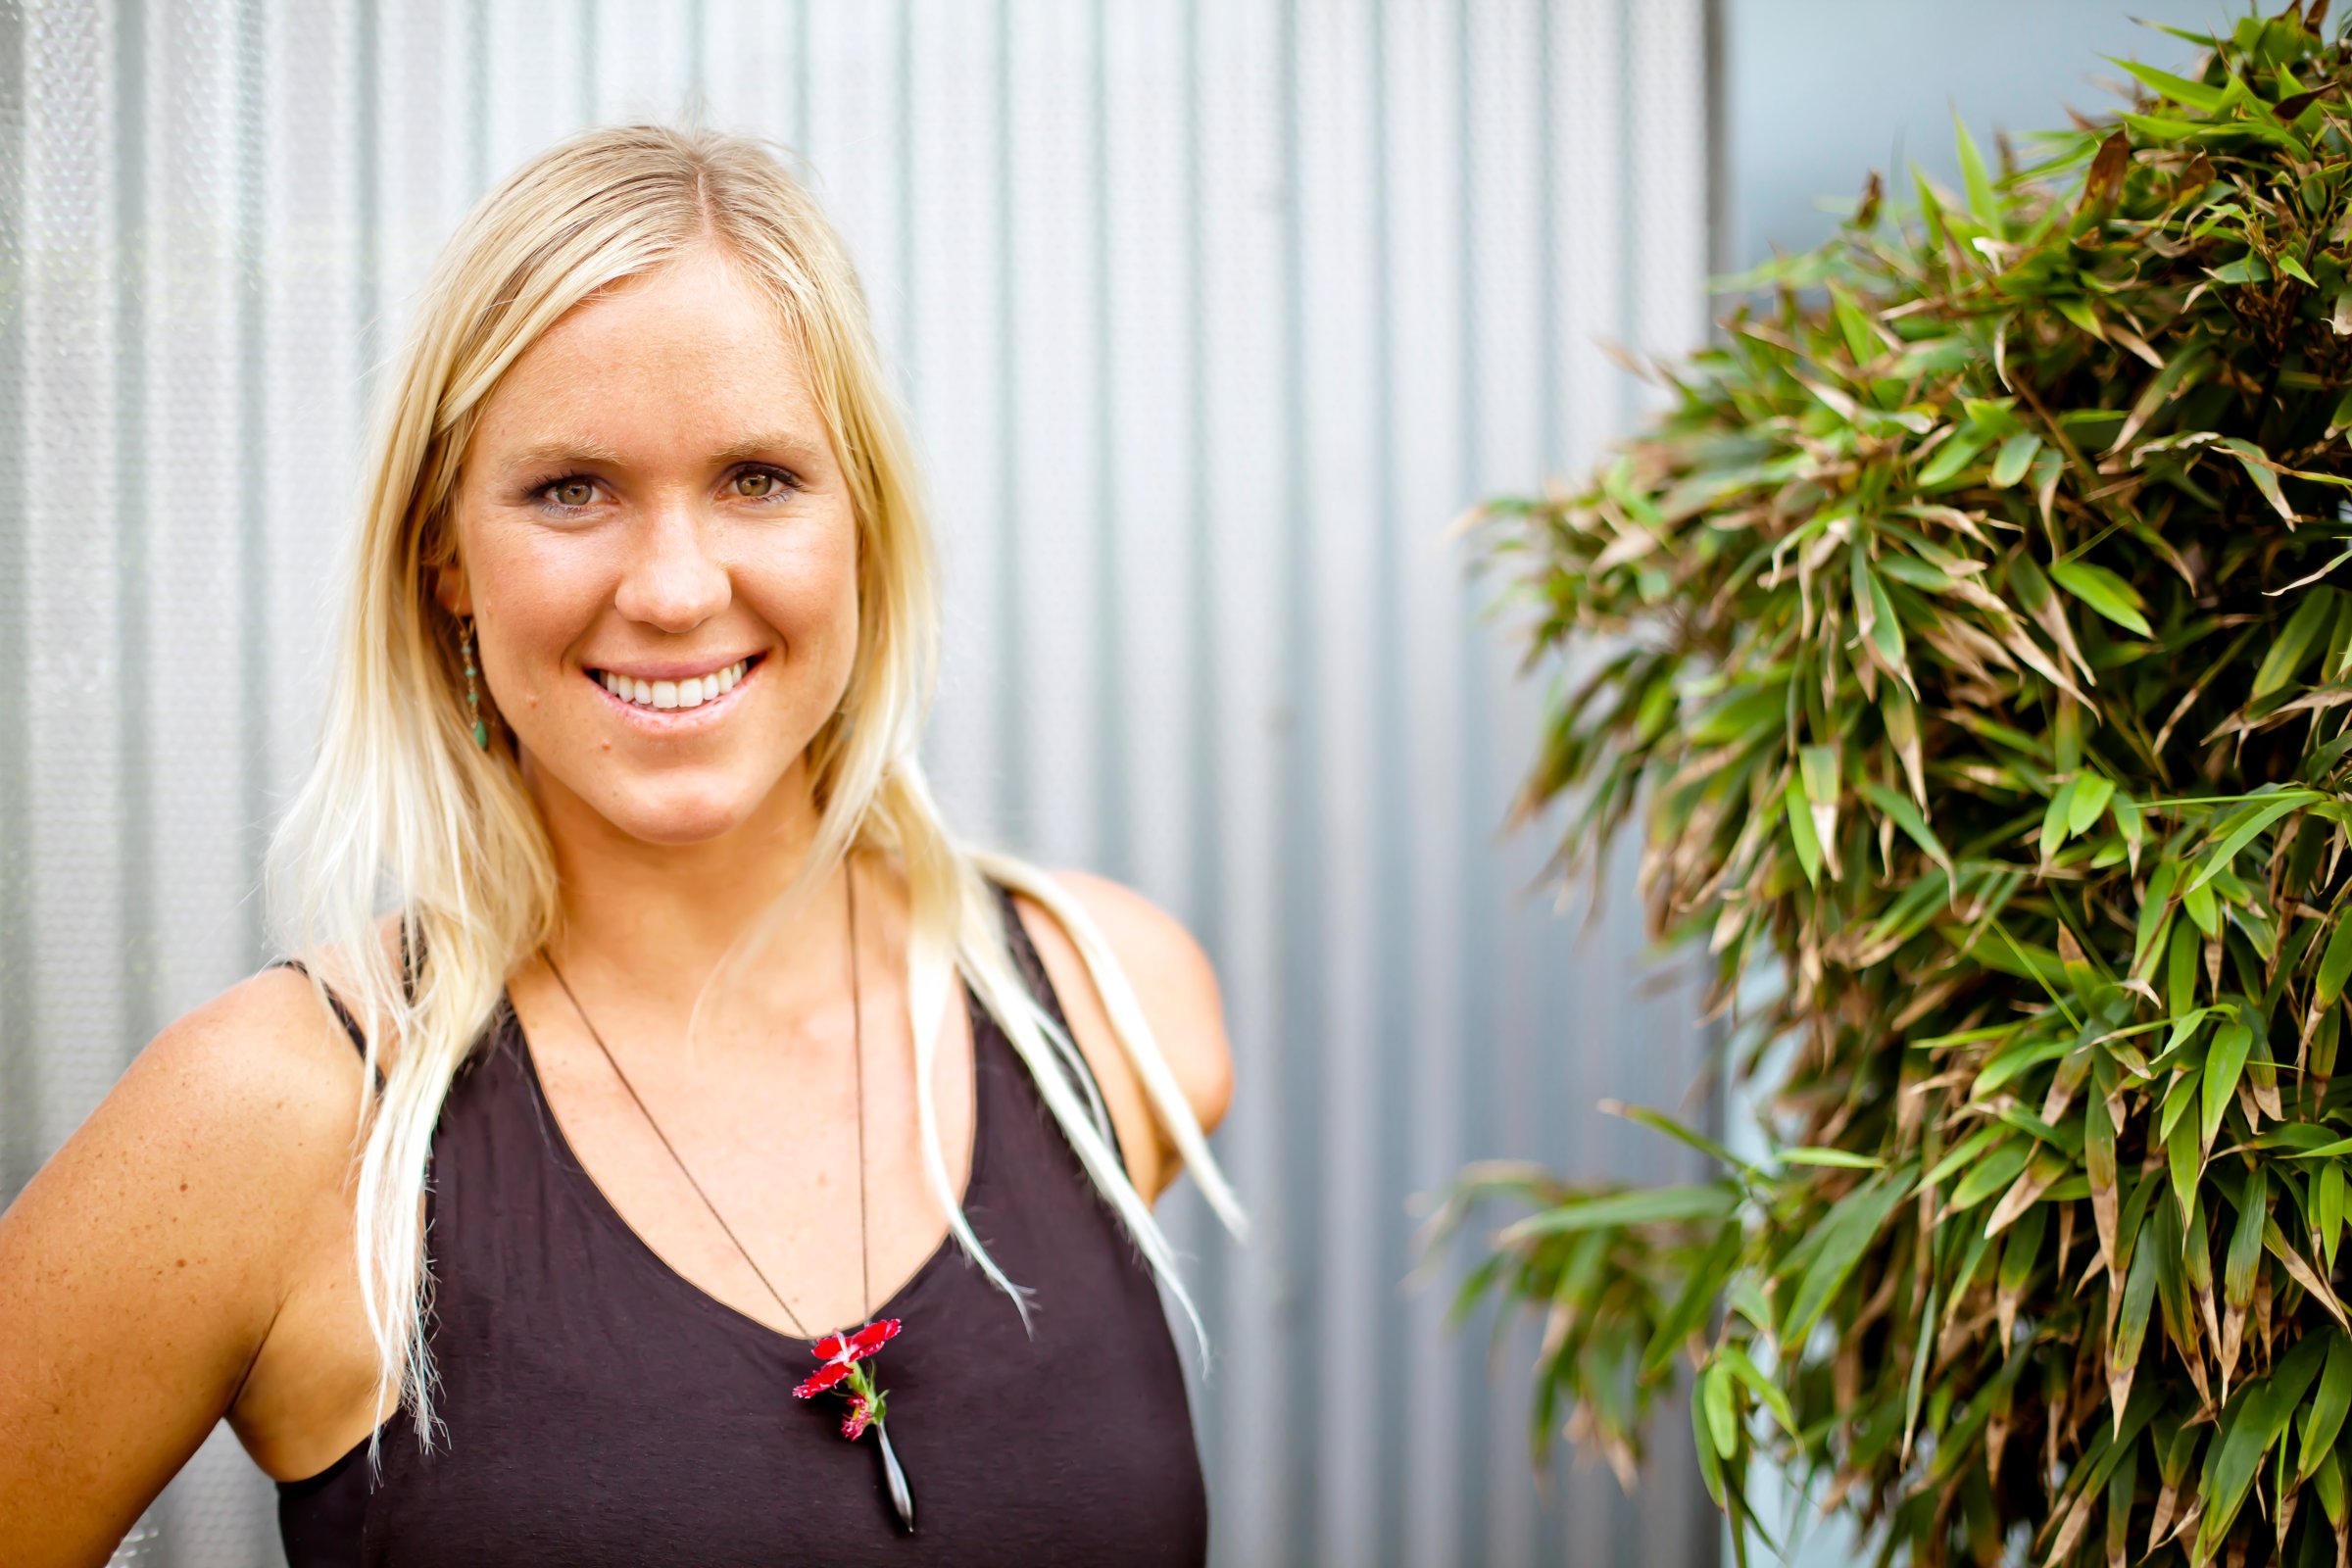 Bethany Hamilton, Self Assignment, March 29, 2014